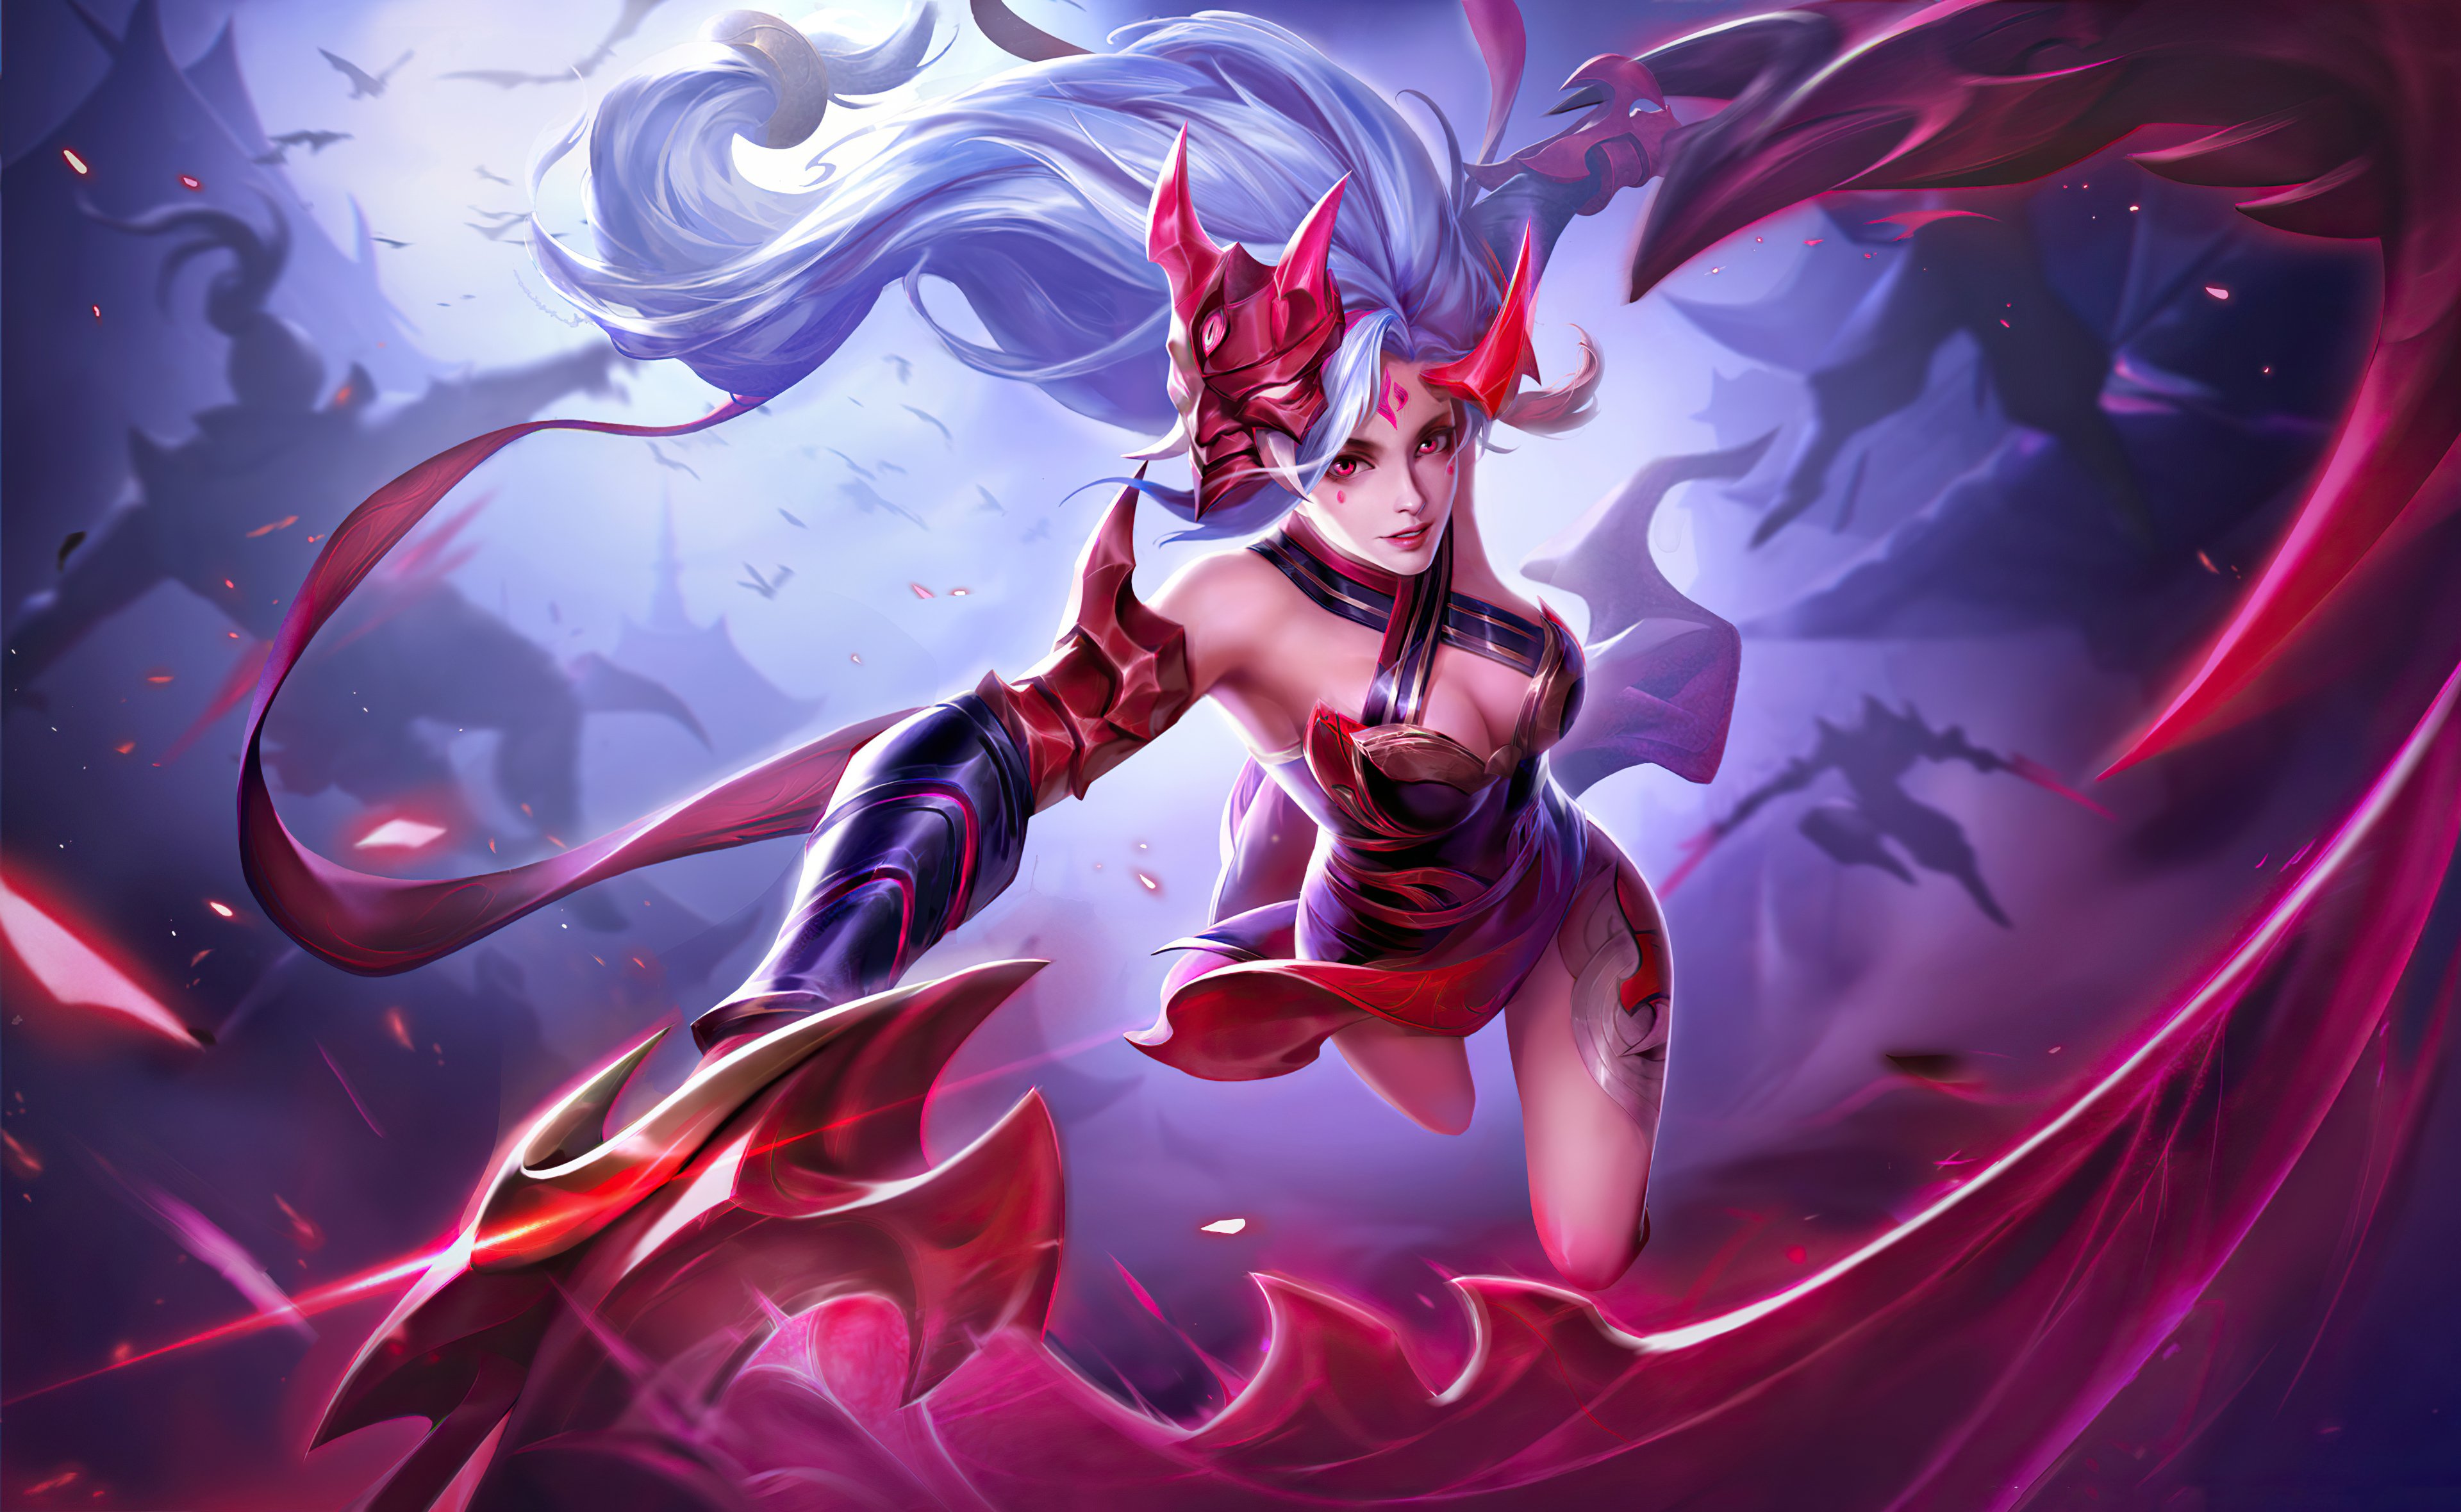 Wallpaper Yena from Arena of Valor